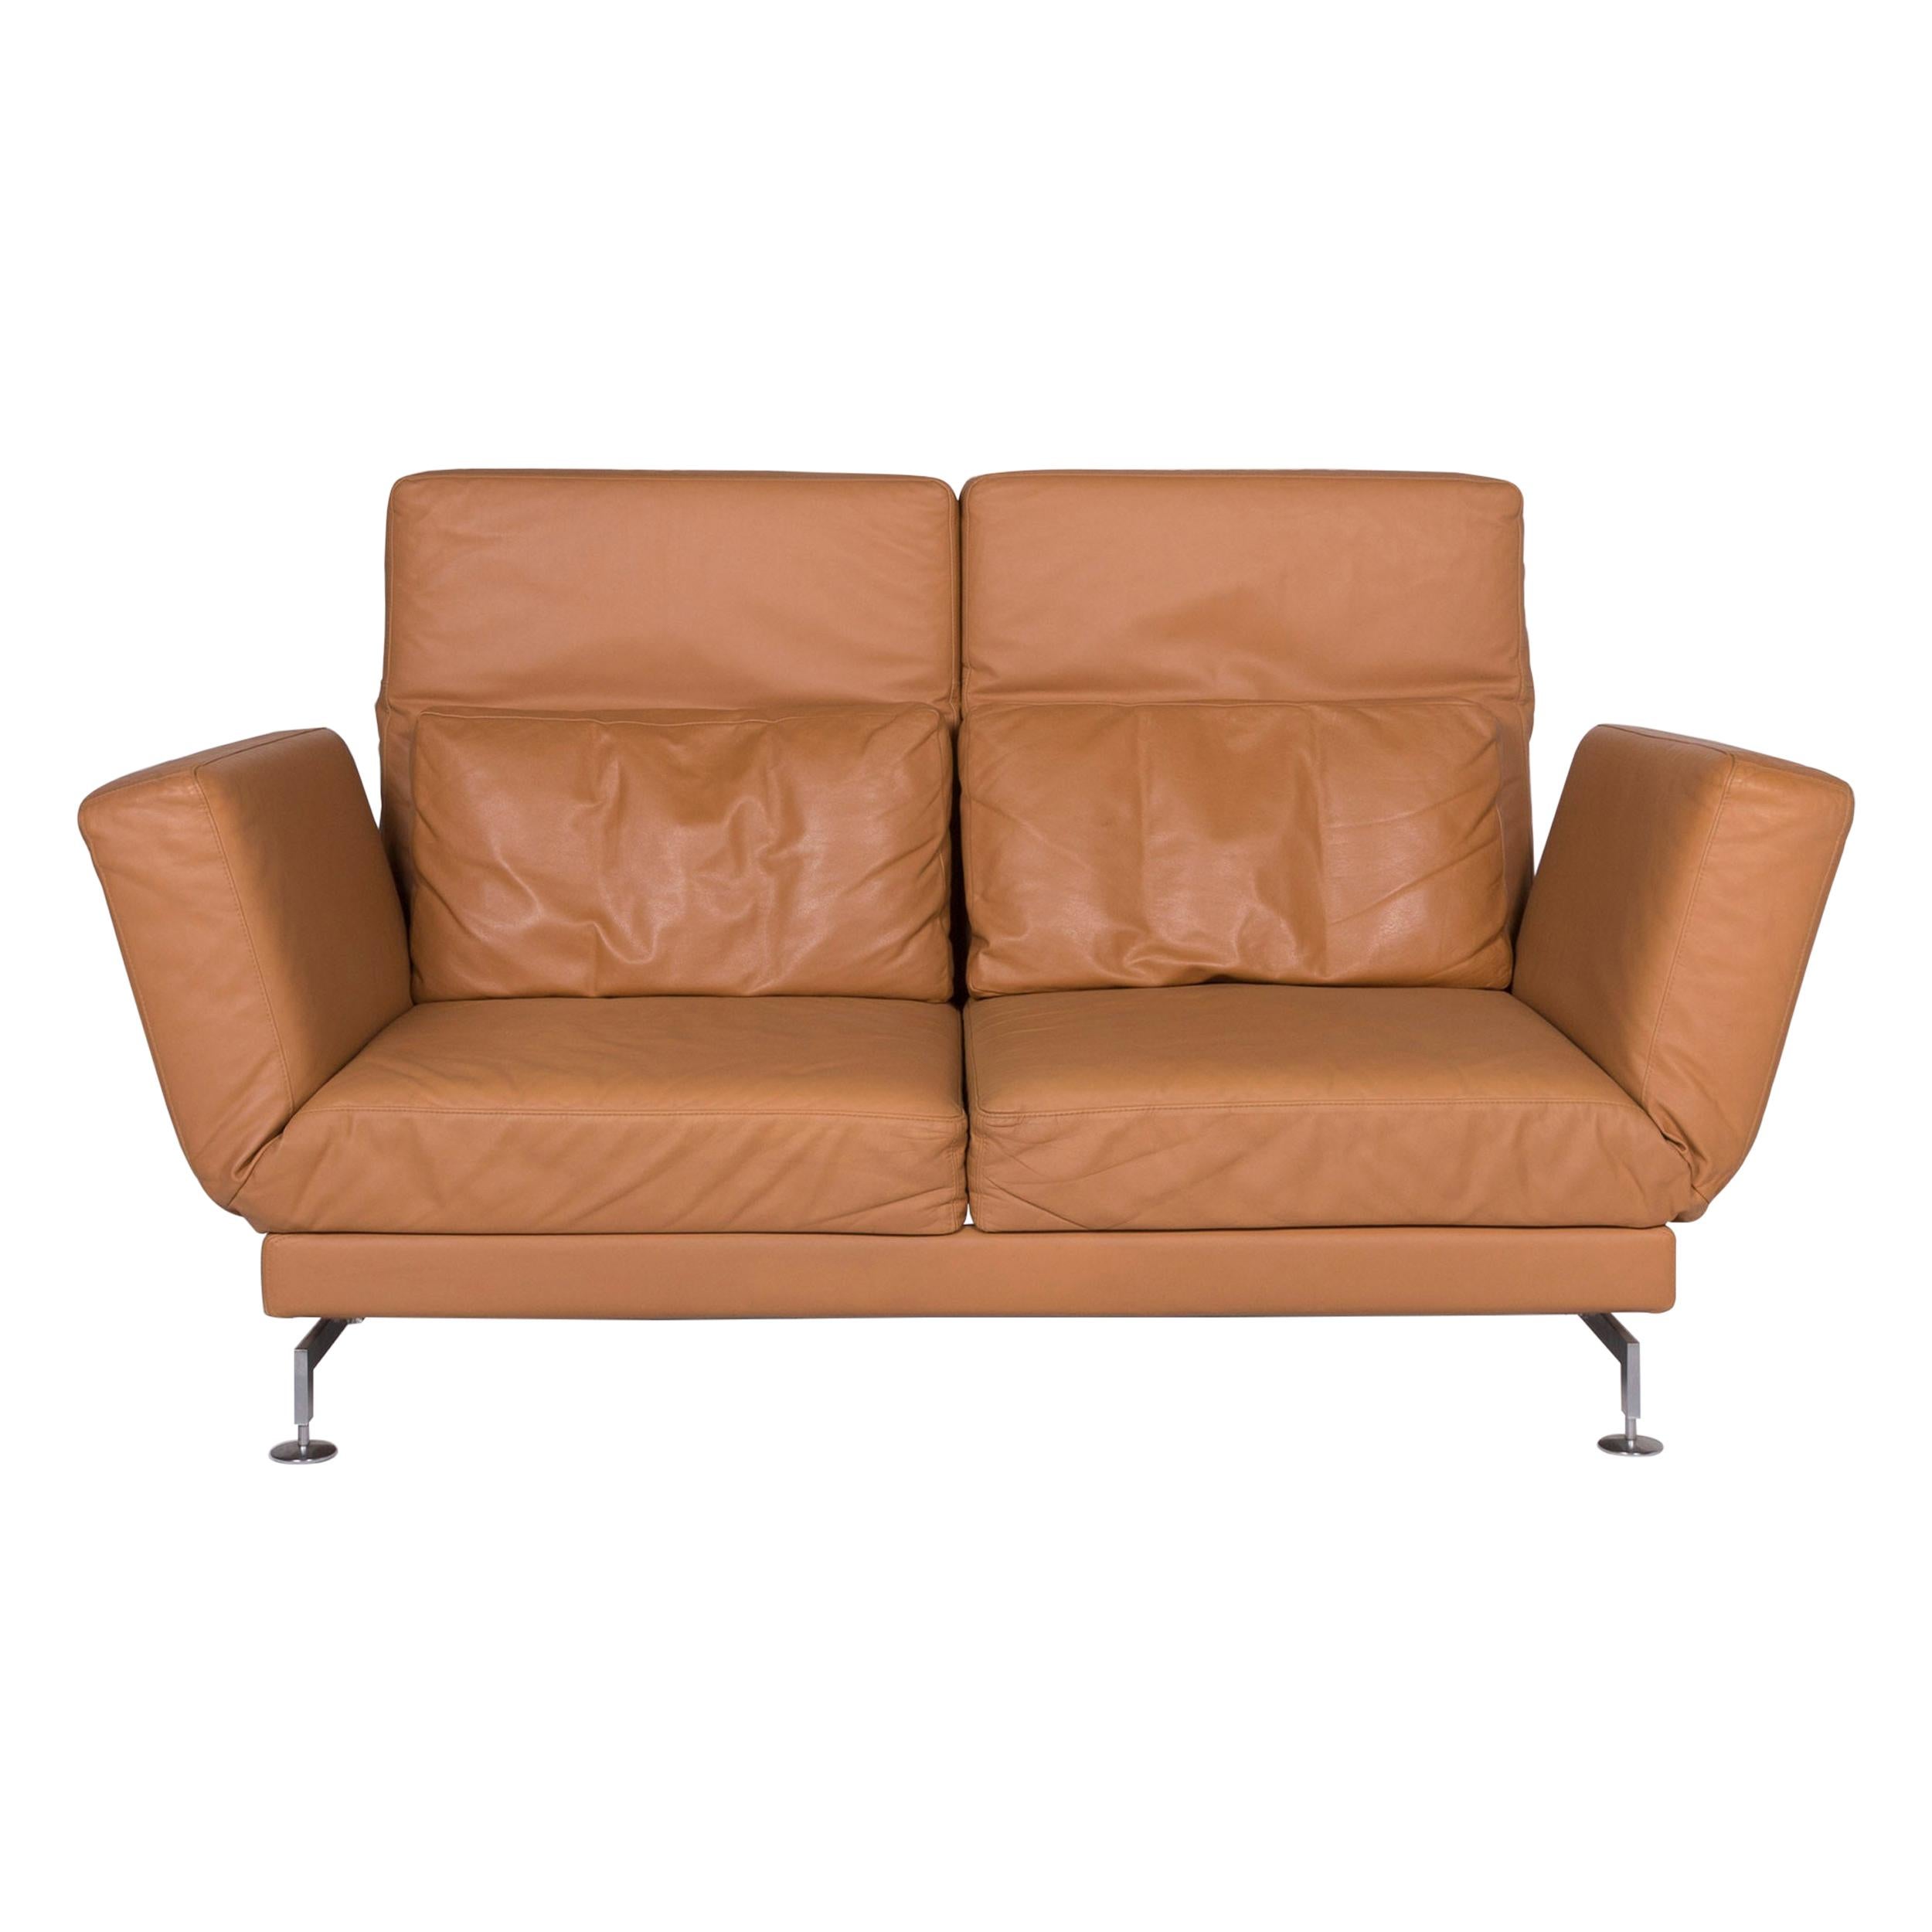 Brühl & Sippold Moule Leather Sofa Brown Two-Seat Incl. Function For Sale